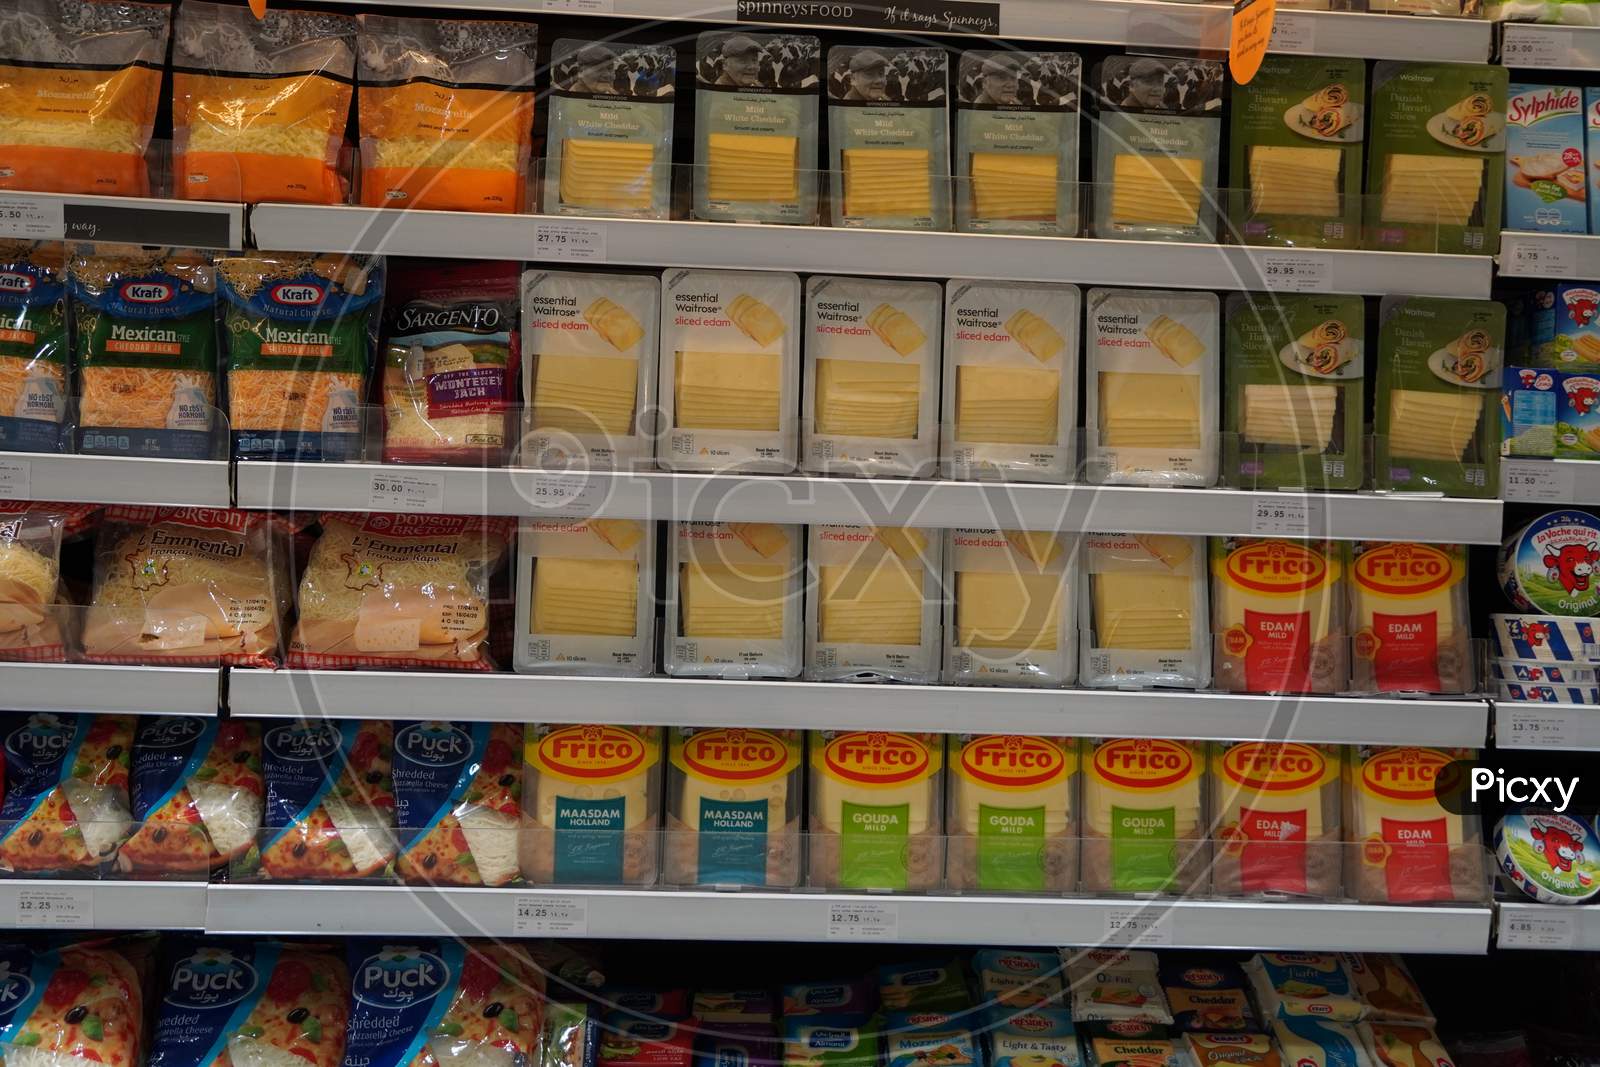 Different Types Of Cheese On Shelves In A Grocery Store. Shelf Of Packaged Products, Butter And Cheese At A Market. Cheddar, Edam, Mozzarella, Gouda, Blue Cheese.